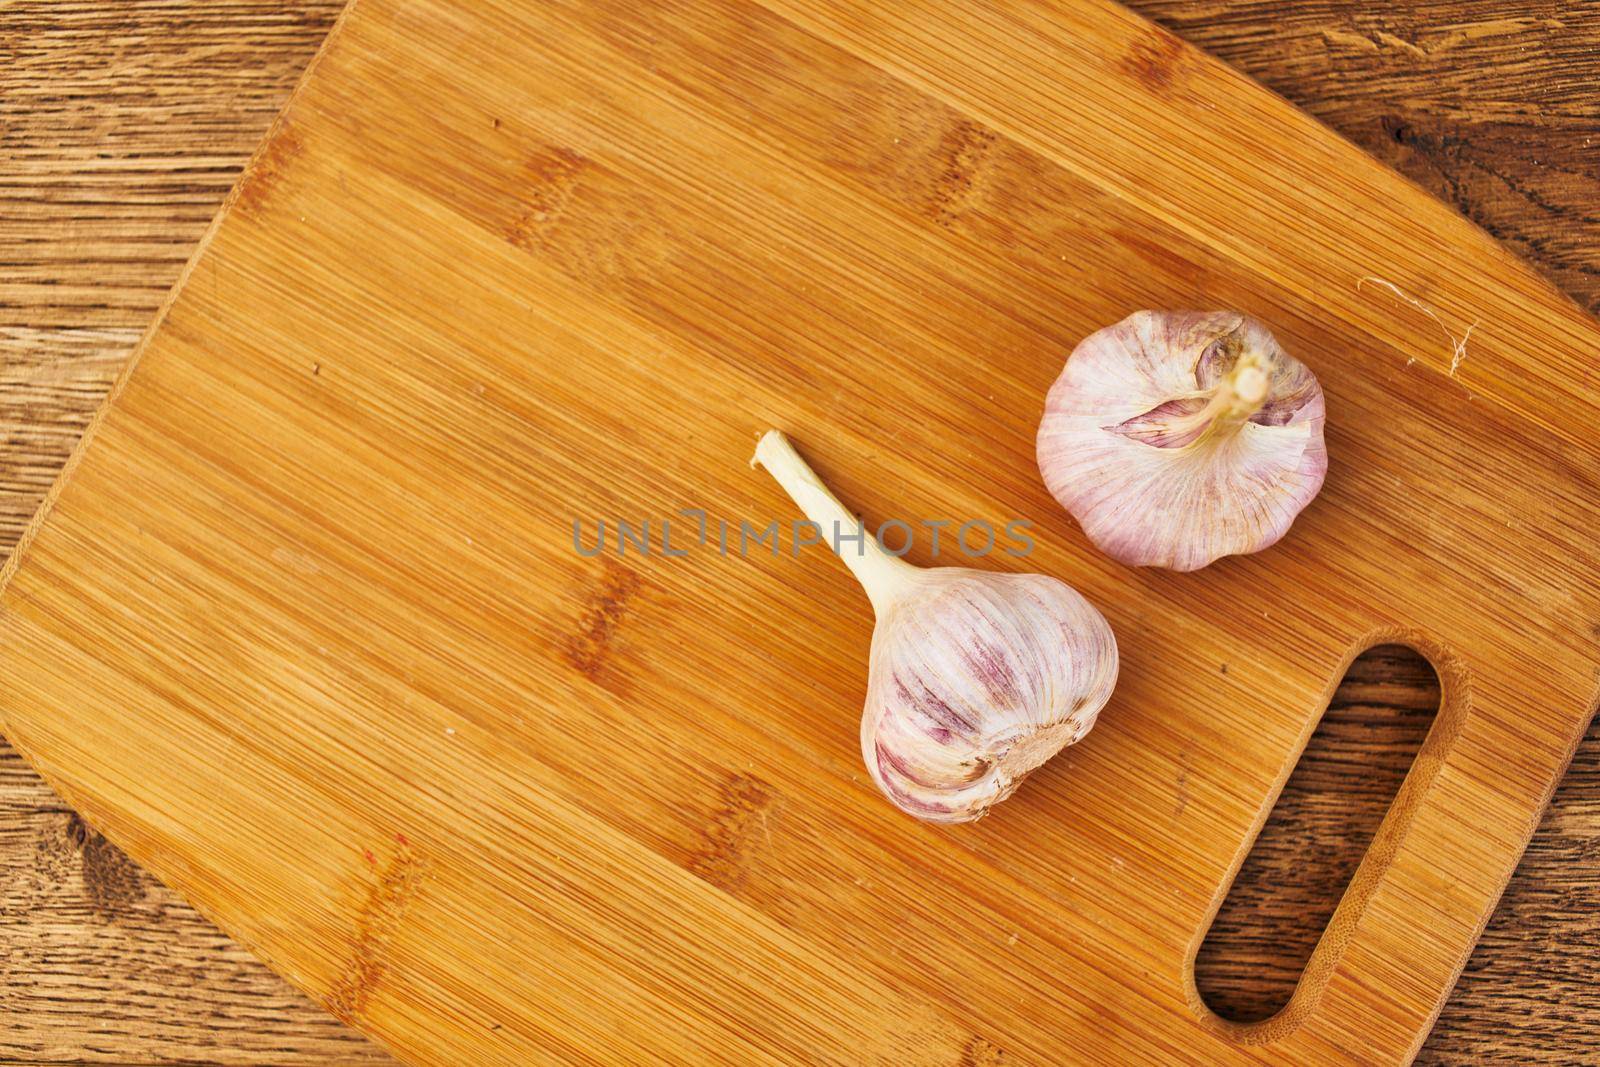 kitchen food garlic cutting board natural product. High quality photo